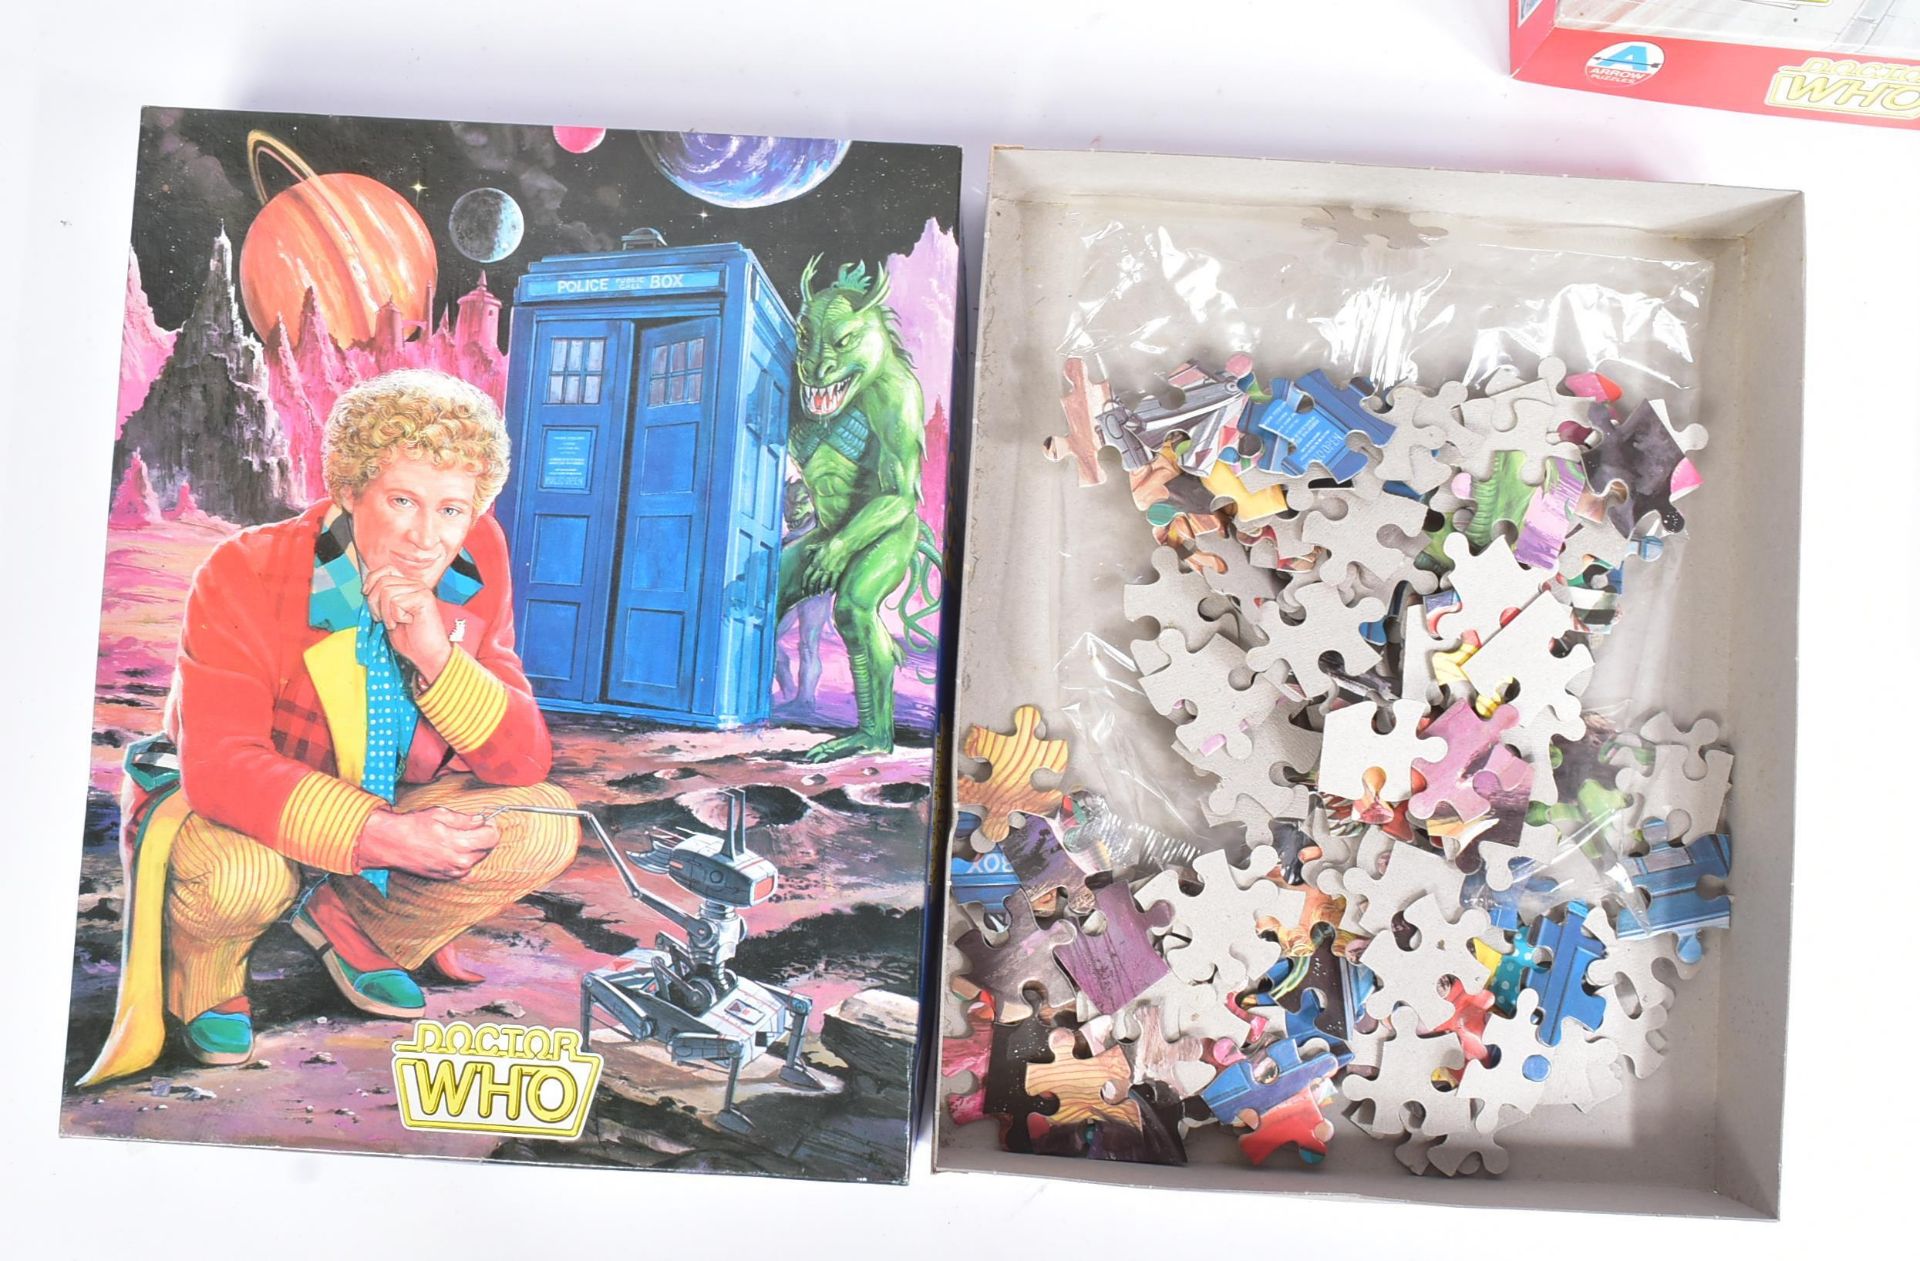 DOCTOR WHO - COLLECTION OF VINTAGE JIGSAW PUZZLES - Image 4 of 6